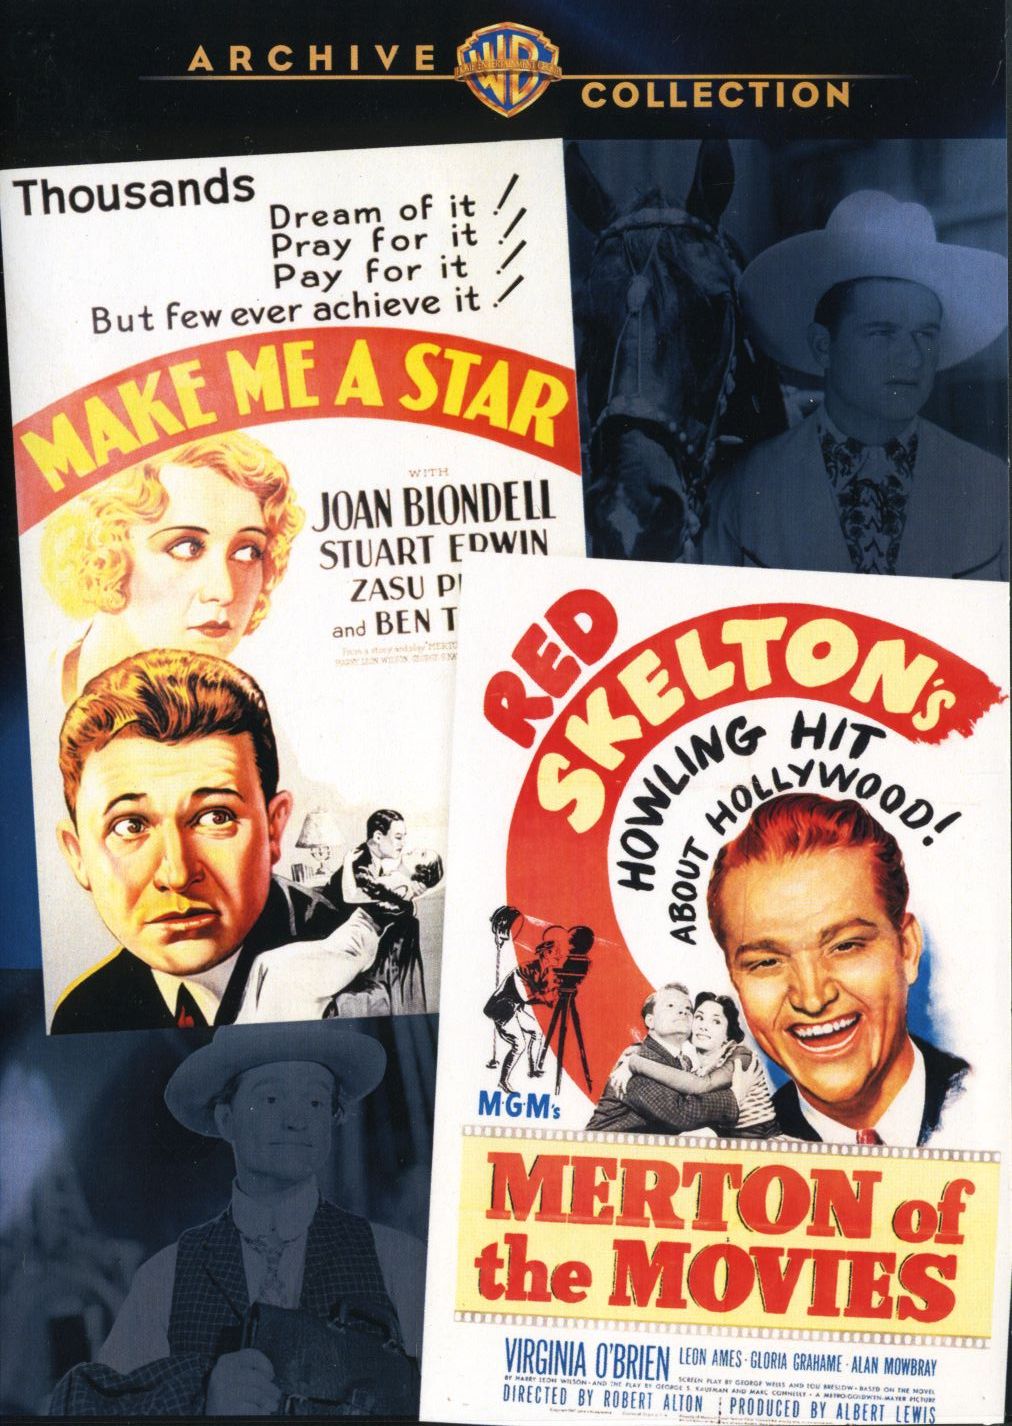 WAC DOUBLE FEATURES: MAKE ME A STAR/MERTON MOVIES